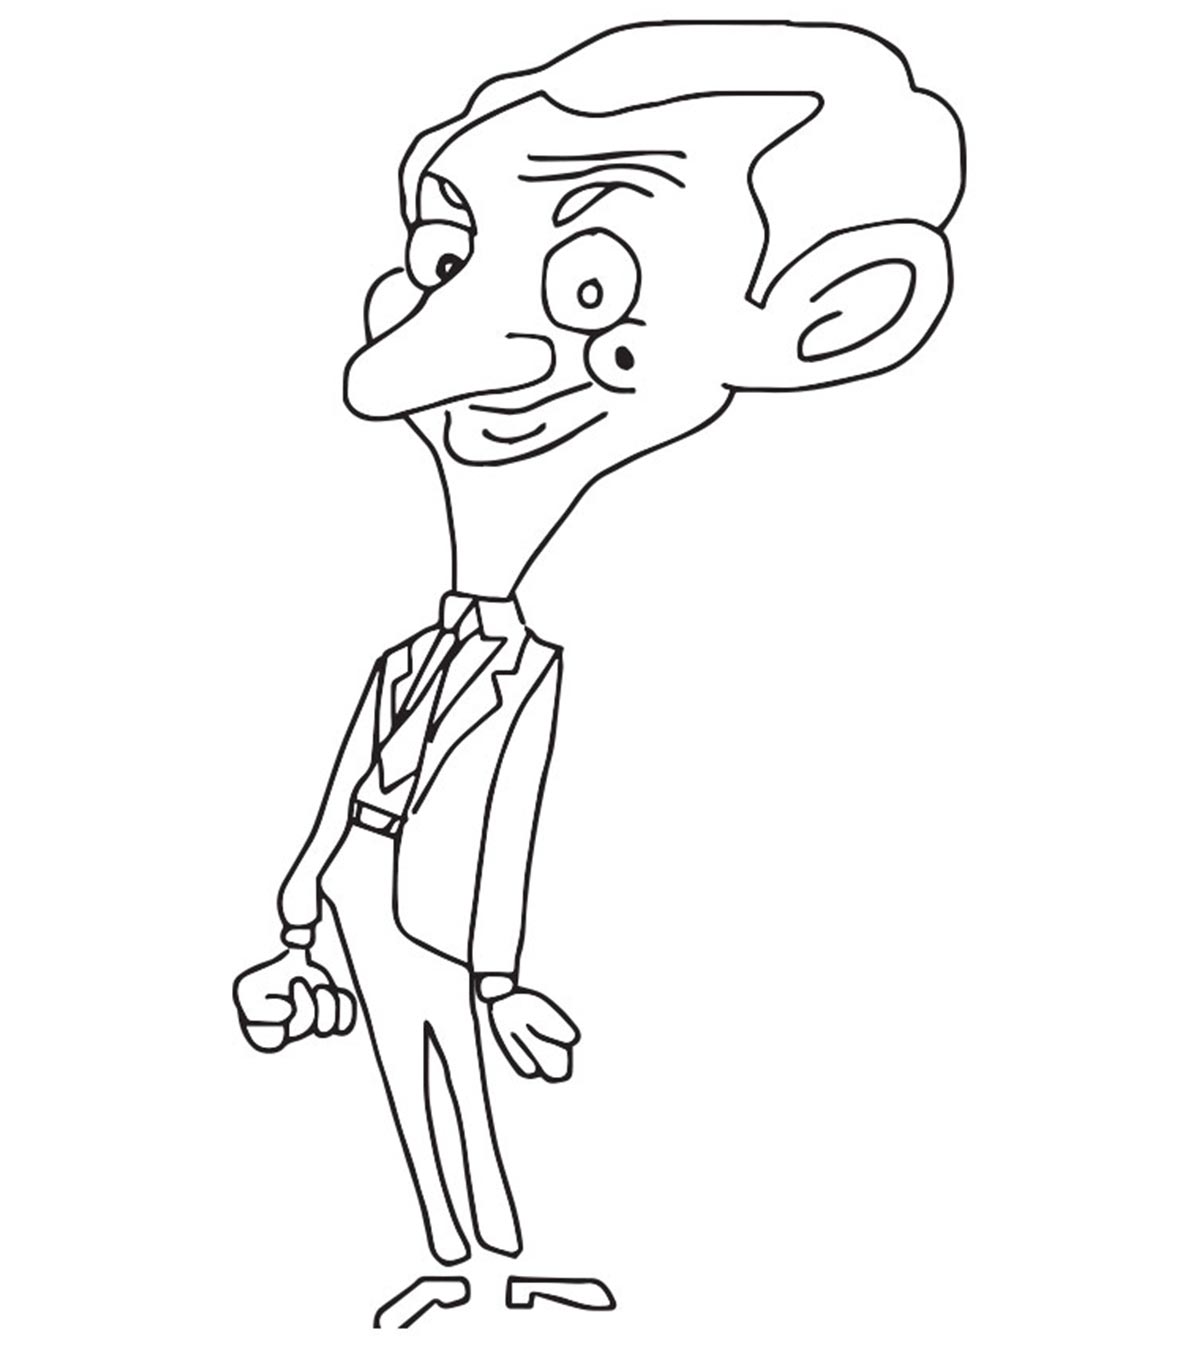 10 Funny Mr. Bean Coloring Pages For Your Toddler